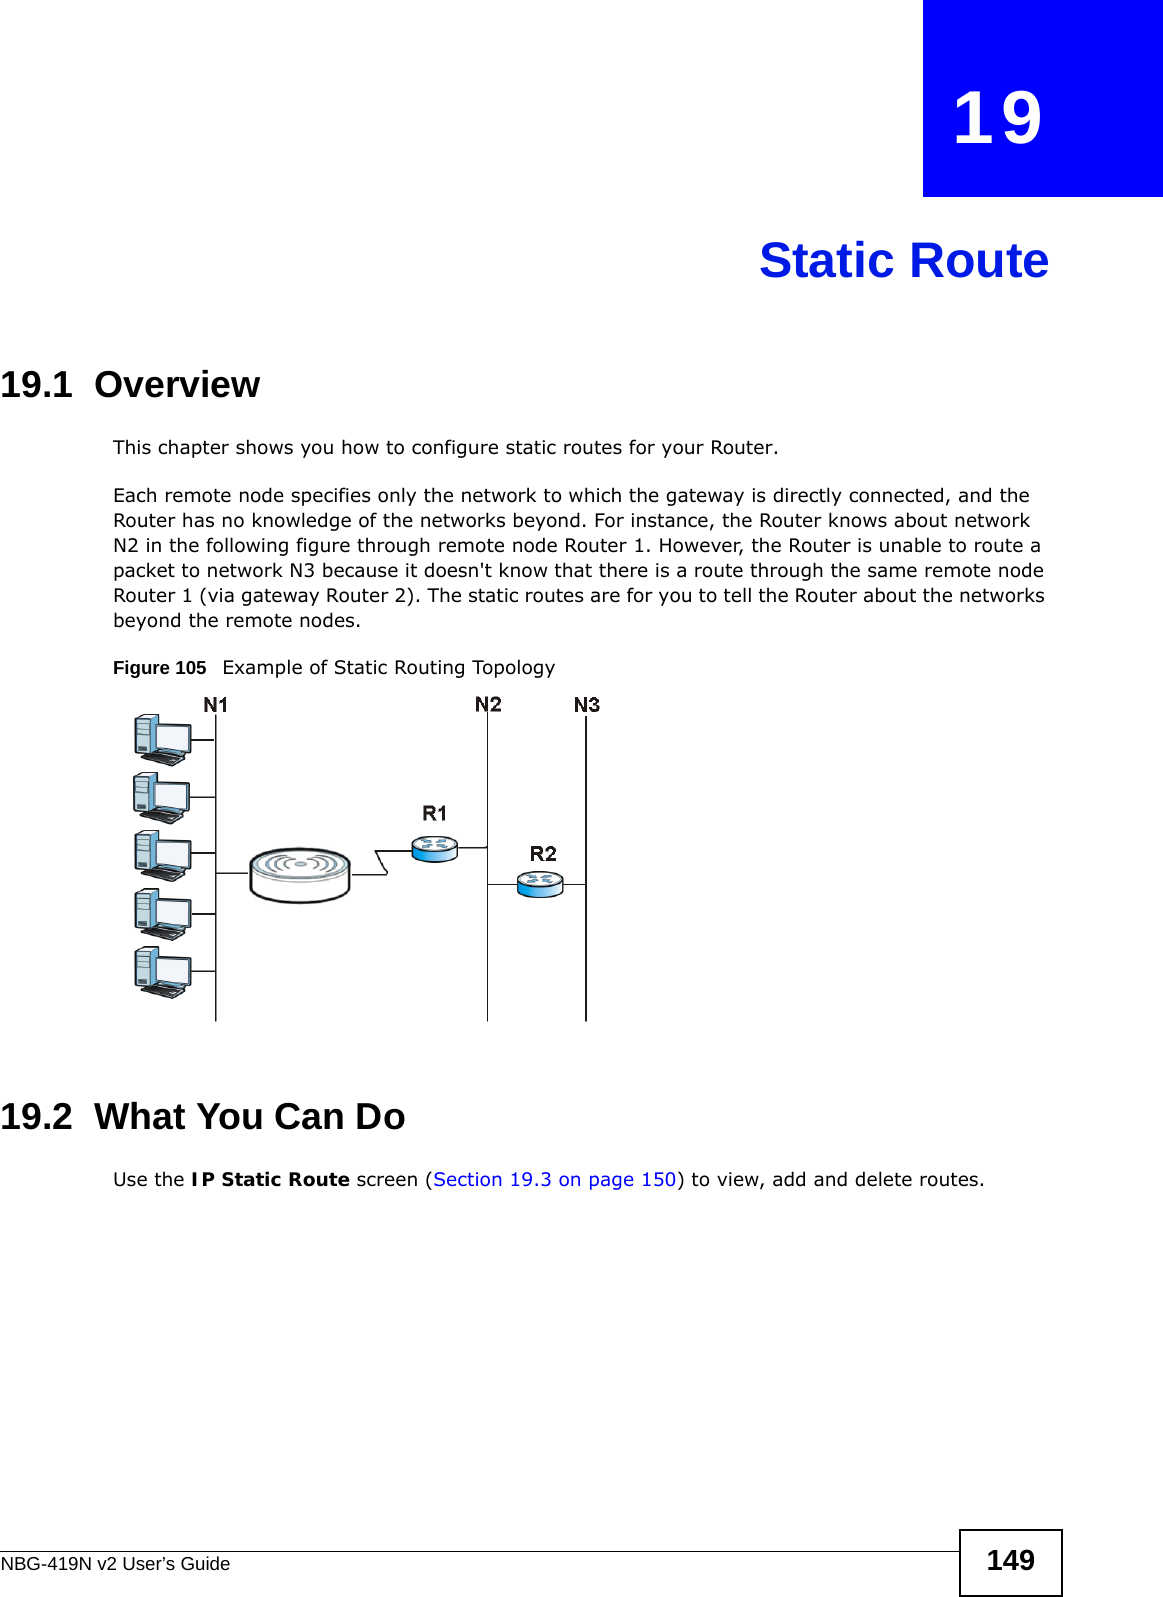 NBG-419N v2 User’s Guide 149CHAPTER   19Static Route19.1  Overview   This chapter shows you how to configure static routes for your Router.Each remote node specifies only the network to which the gateway is directly connected, and the Router has no knowledge of the networks beyond. For instance, the Router knows about network N2 in the following figure through remote node Router 1. However, the Router is unable to route a packet to network N3 because it doesn&apos;t know that there is a route through the same remote node Router 1 (via gateway Router 2). The static routes are for you to tell the Router about the networks beyond the remote nodes.Figure 105   Example of Static Routing Topology19.2  What You Can DoUse the IP Static Route screen (Section 19.3 on page 150) to view, add and delete routes.